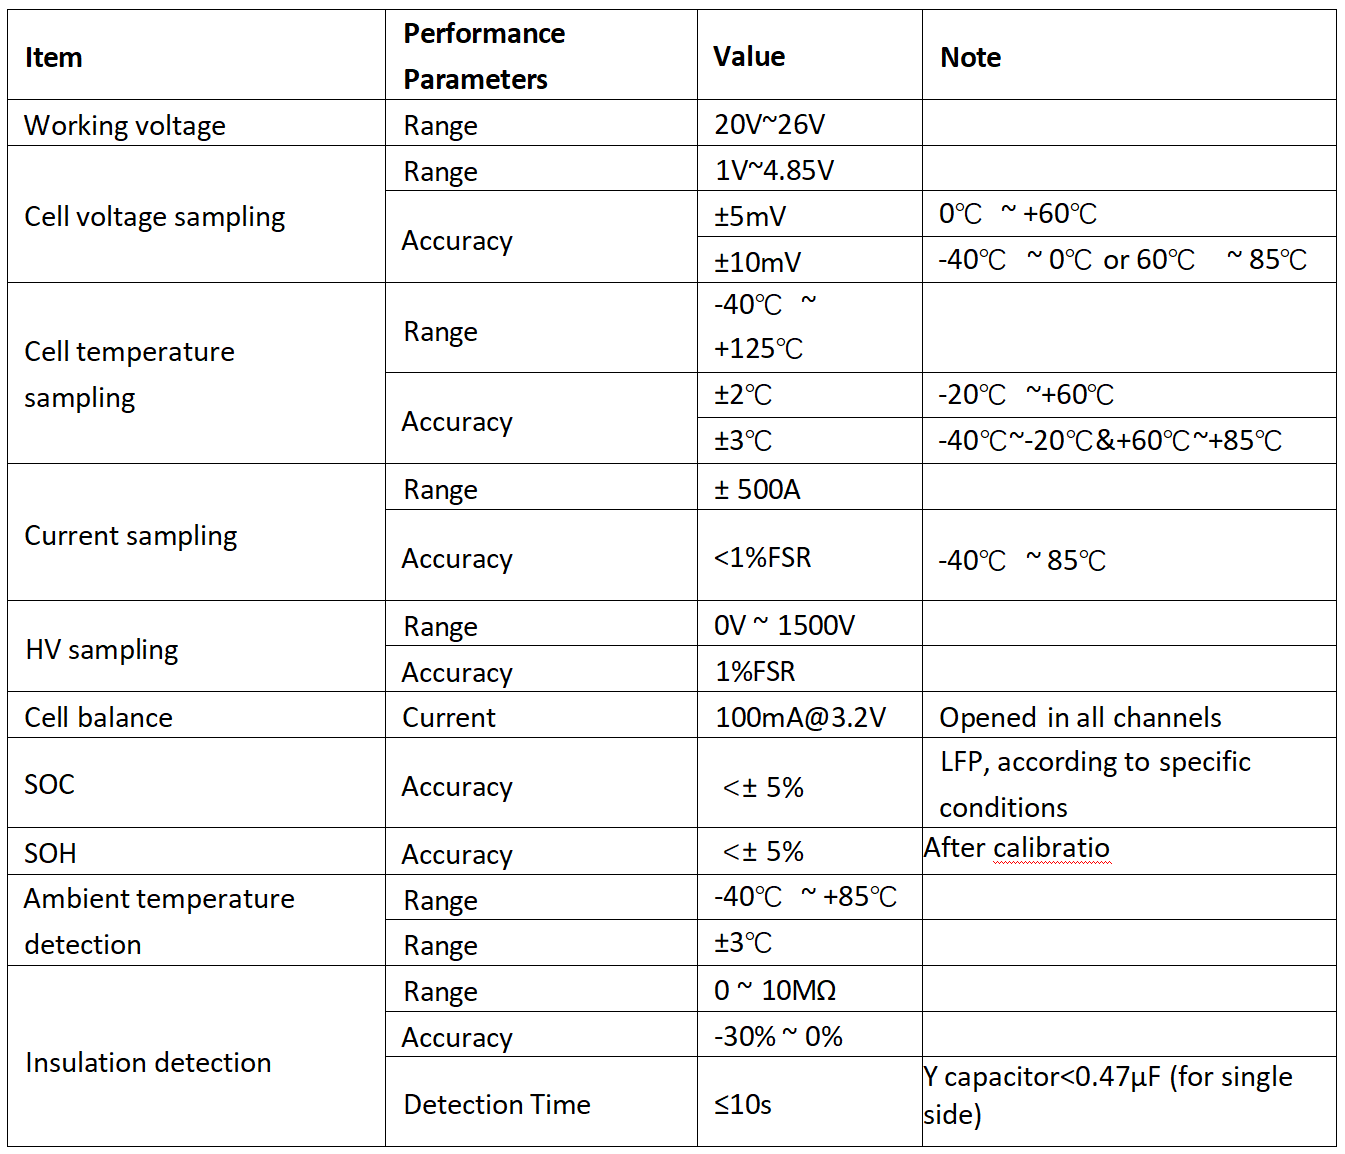 Detailed Performance Parameters of BMS